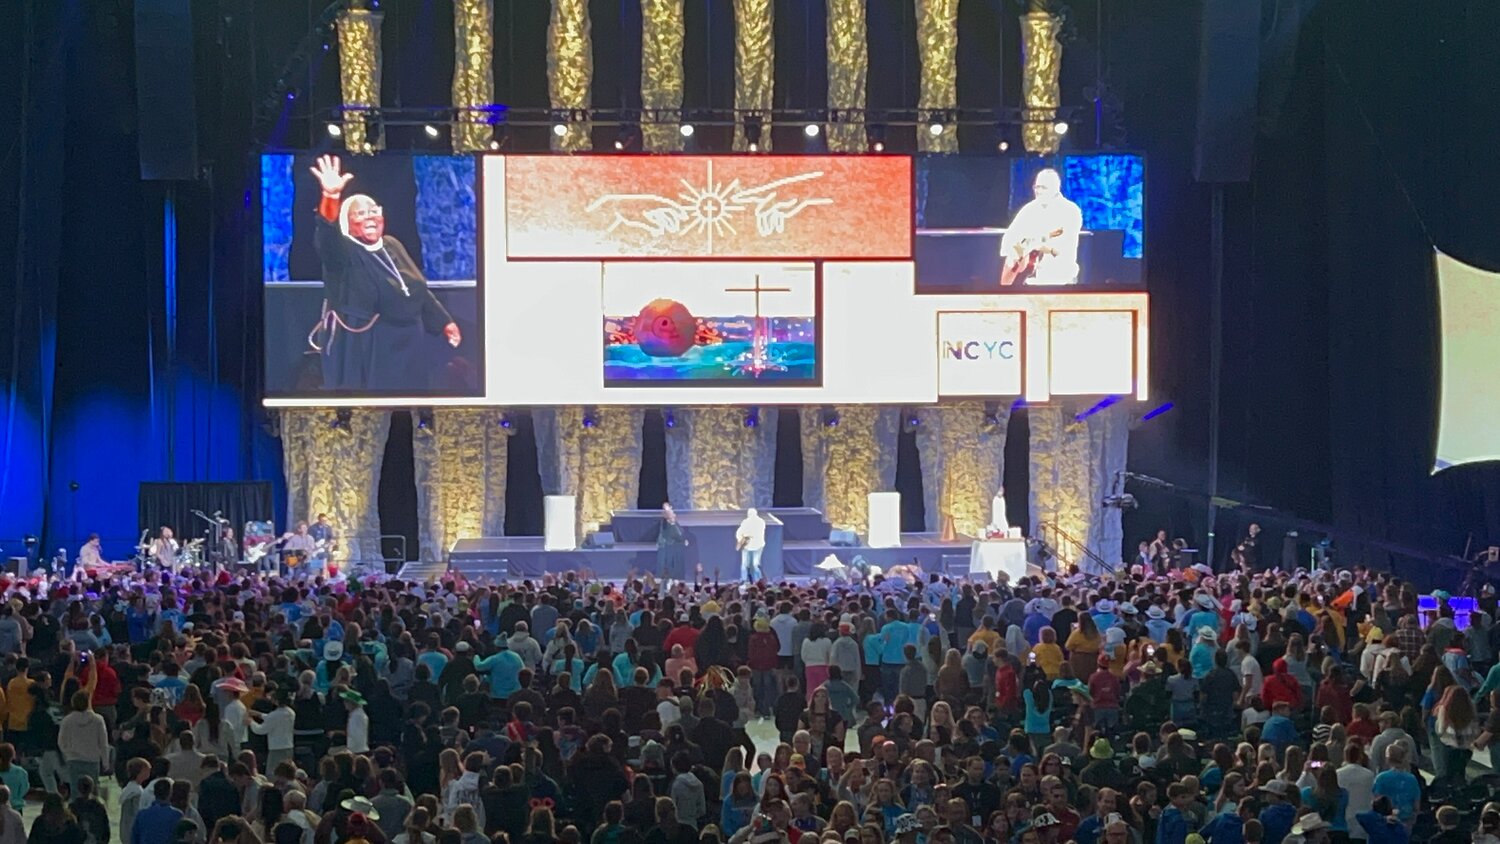 Thousands of Catholic teens take part in a general session during this year’s National Catholic Youth Conference in Indianapolis.